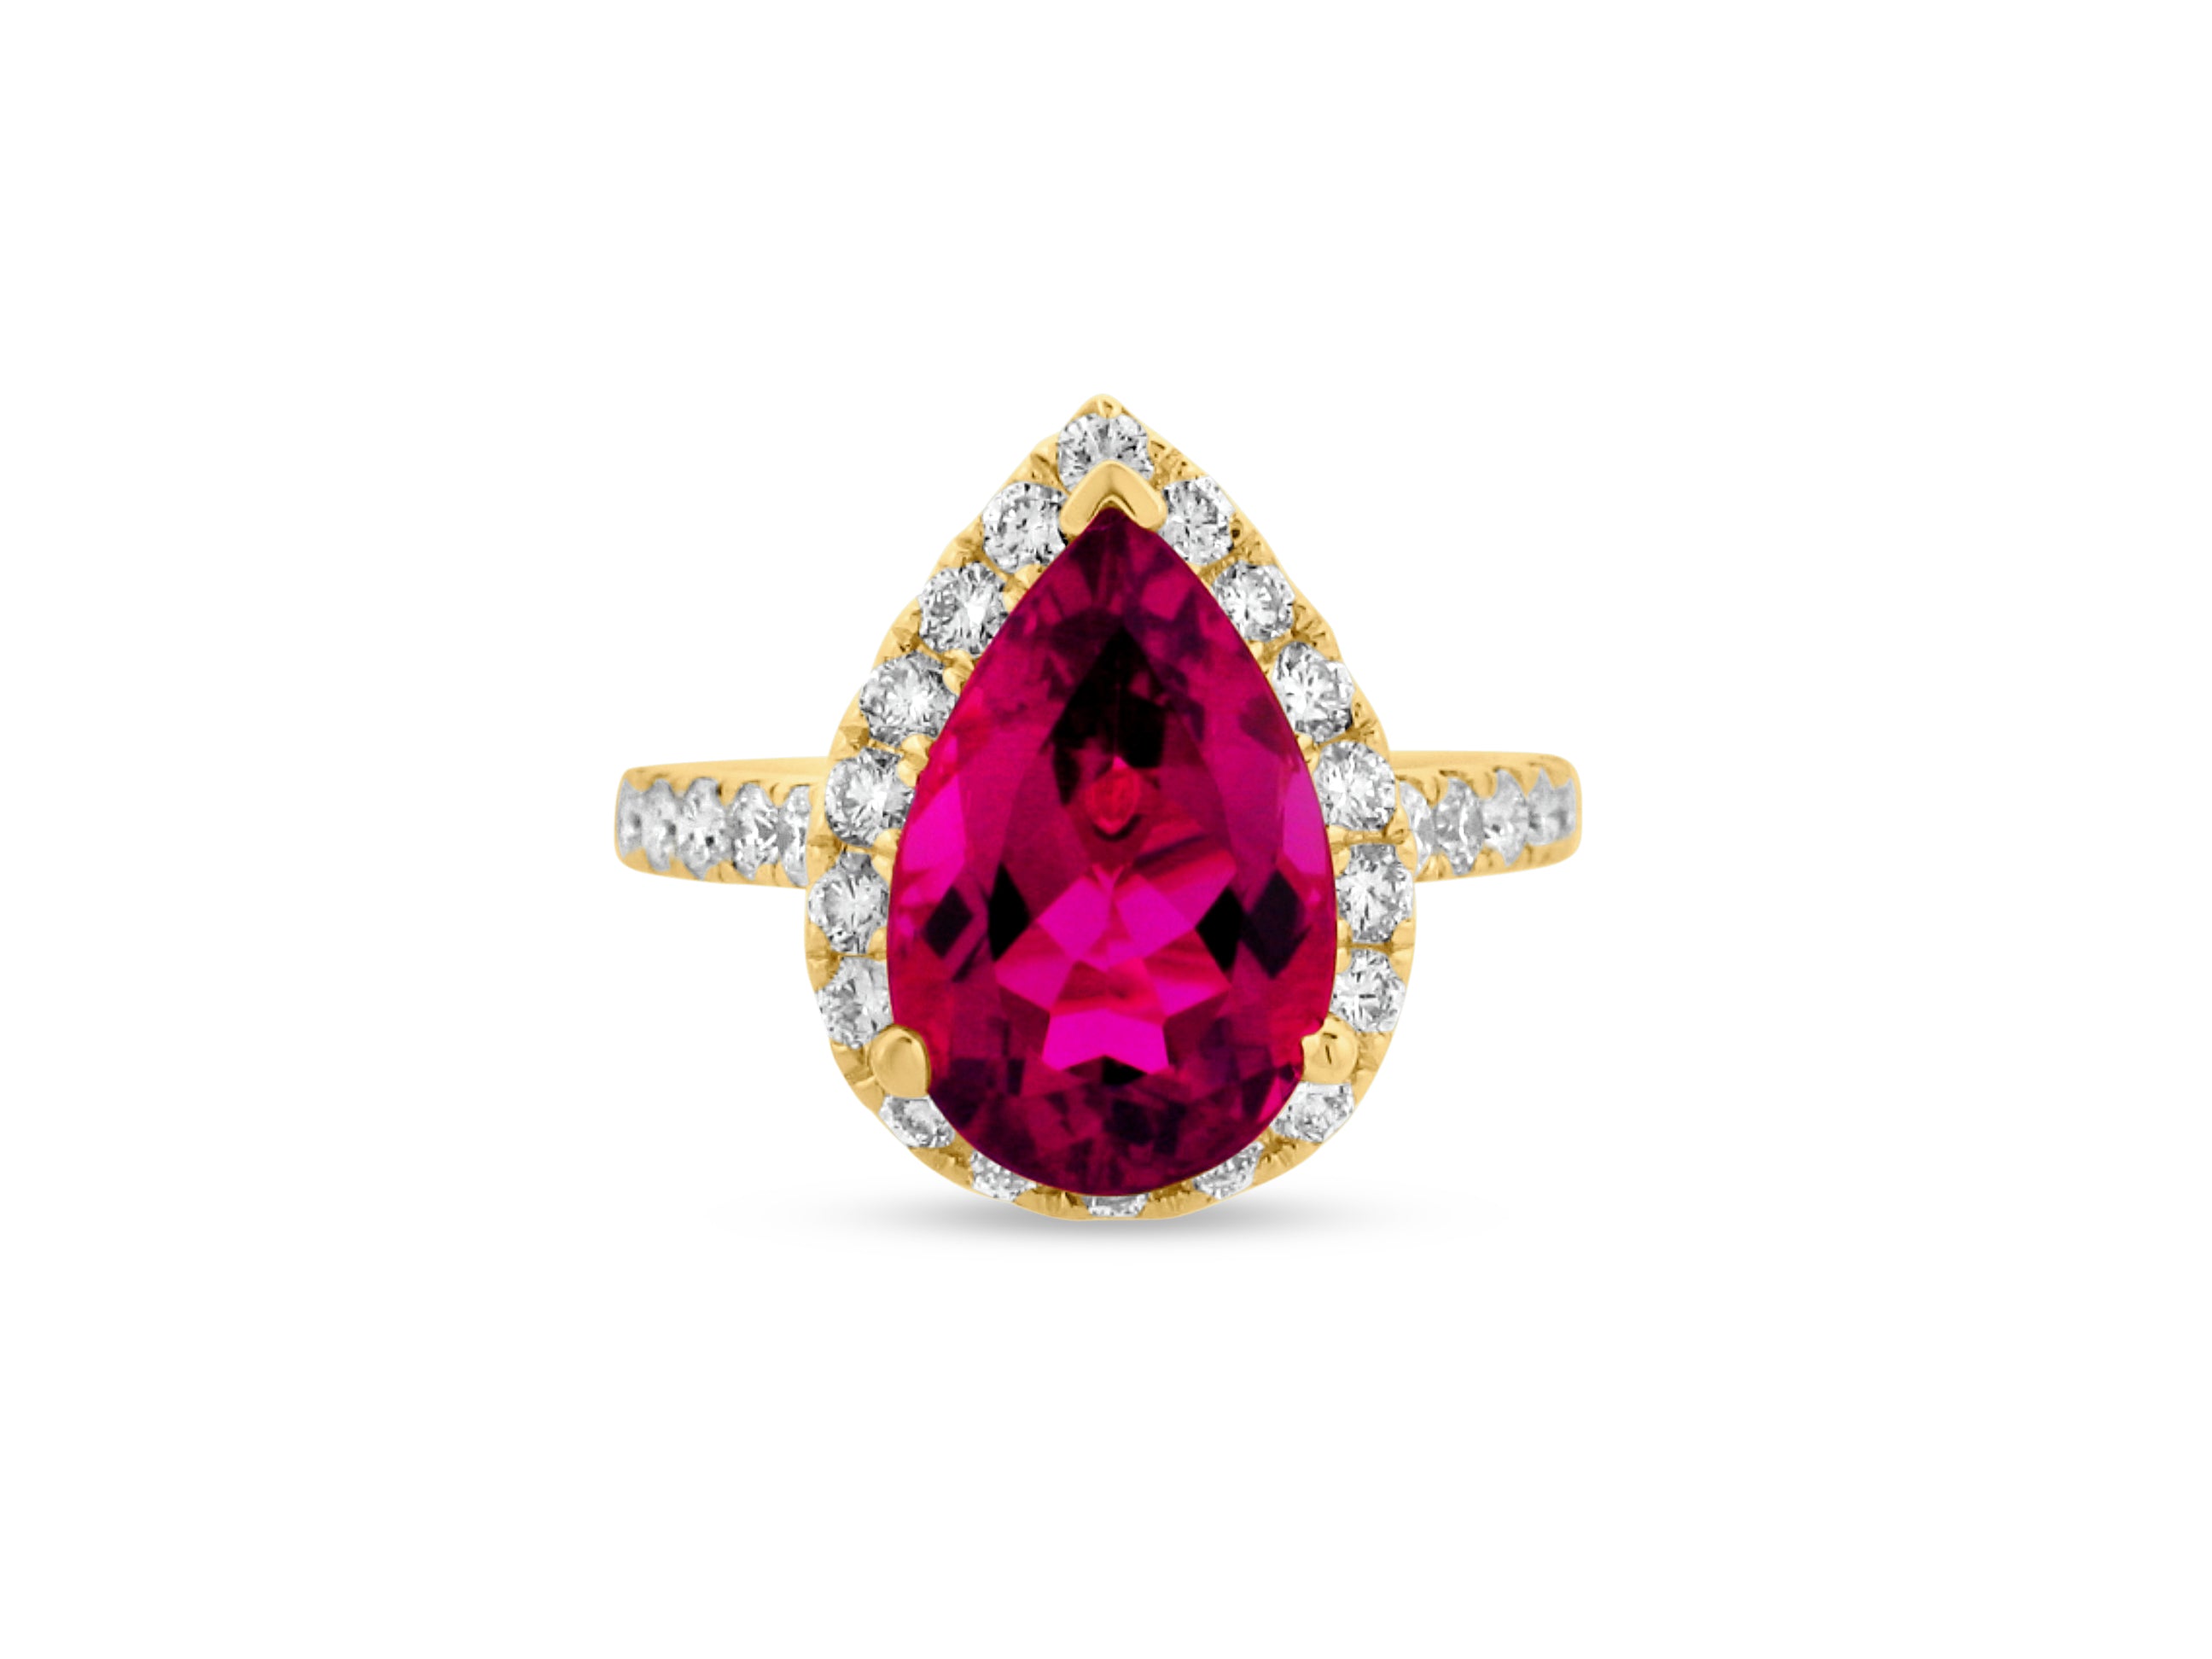 PRIVE' 18K YELLOW GOLD 4.28CT A+ PINK TOURMALINE PEAR SHAPE SURROUNDED BY 1.03CT VS/SI CLARITY AND G COLOR ACCENT NATURAL DIAMONDS.